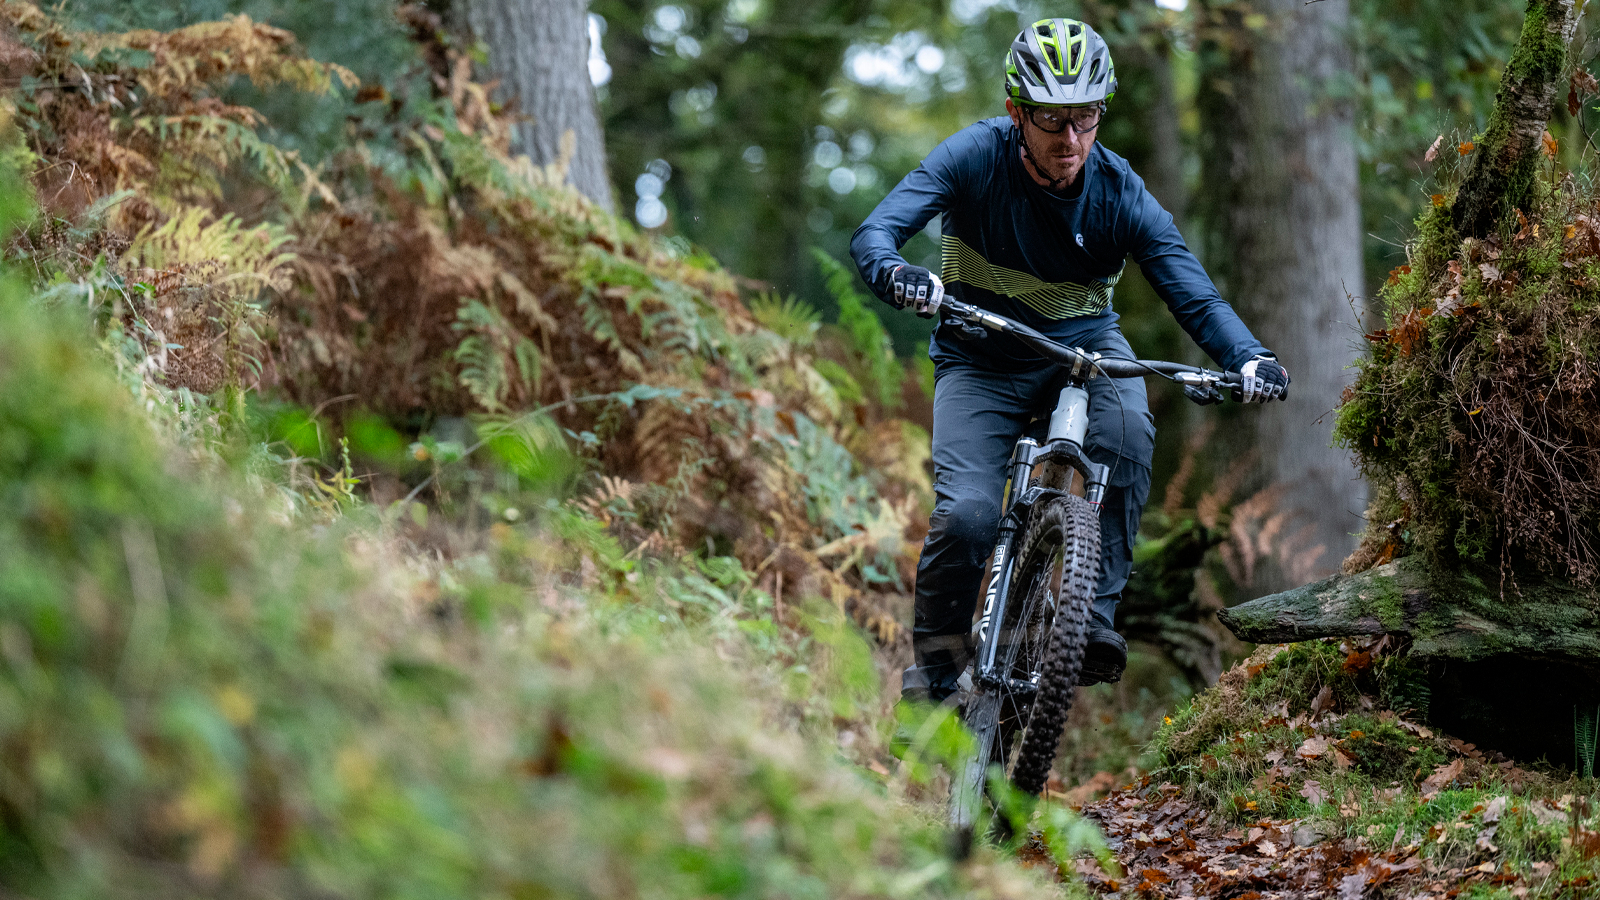 Best waterproof trousers for mountain biking: Stay dry and cosy